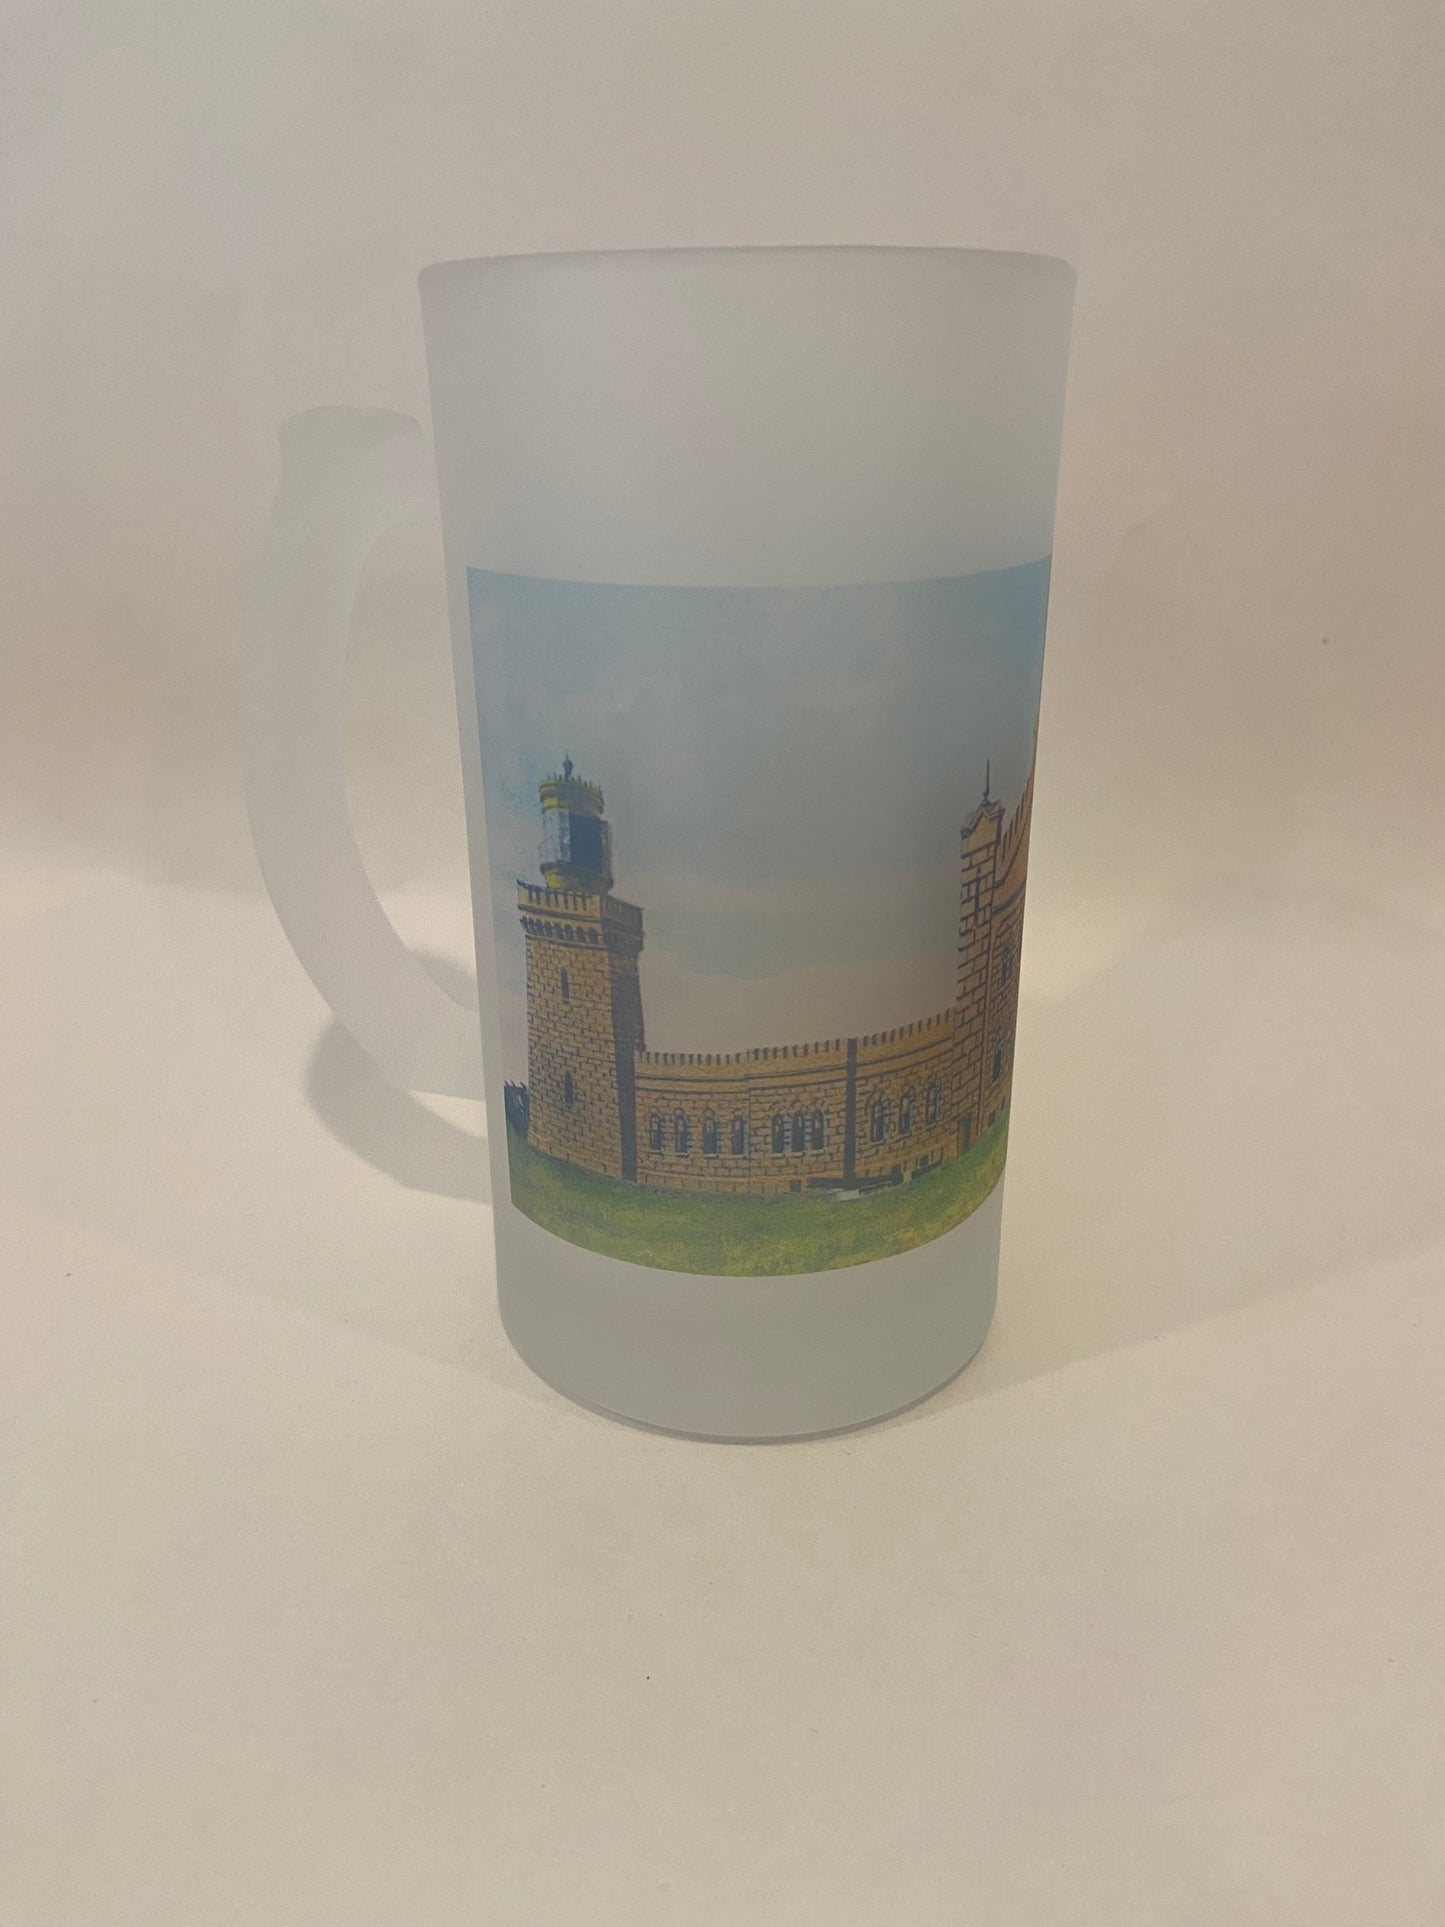 Twin Lights Highland NJ As A Colorful Frosted Glass Beer Mug